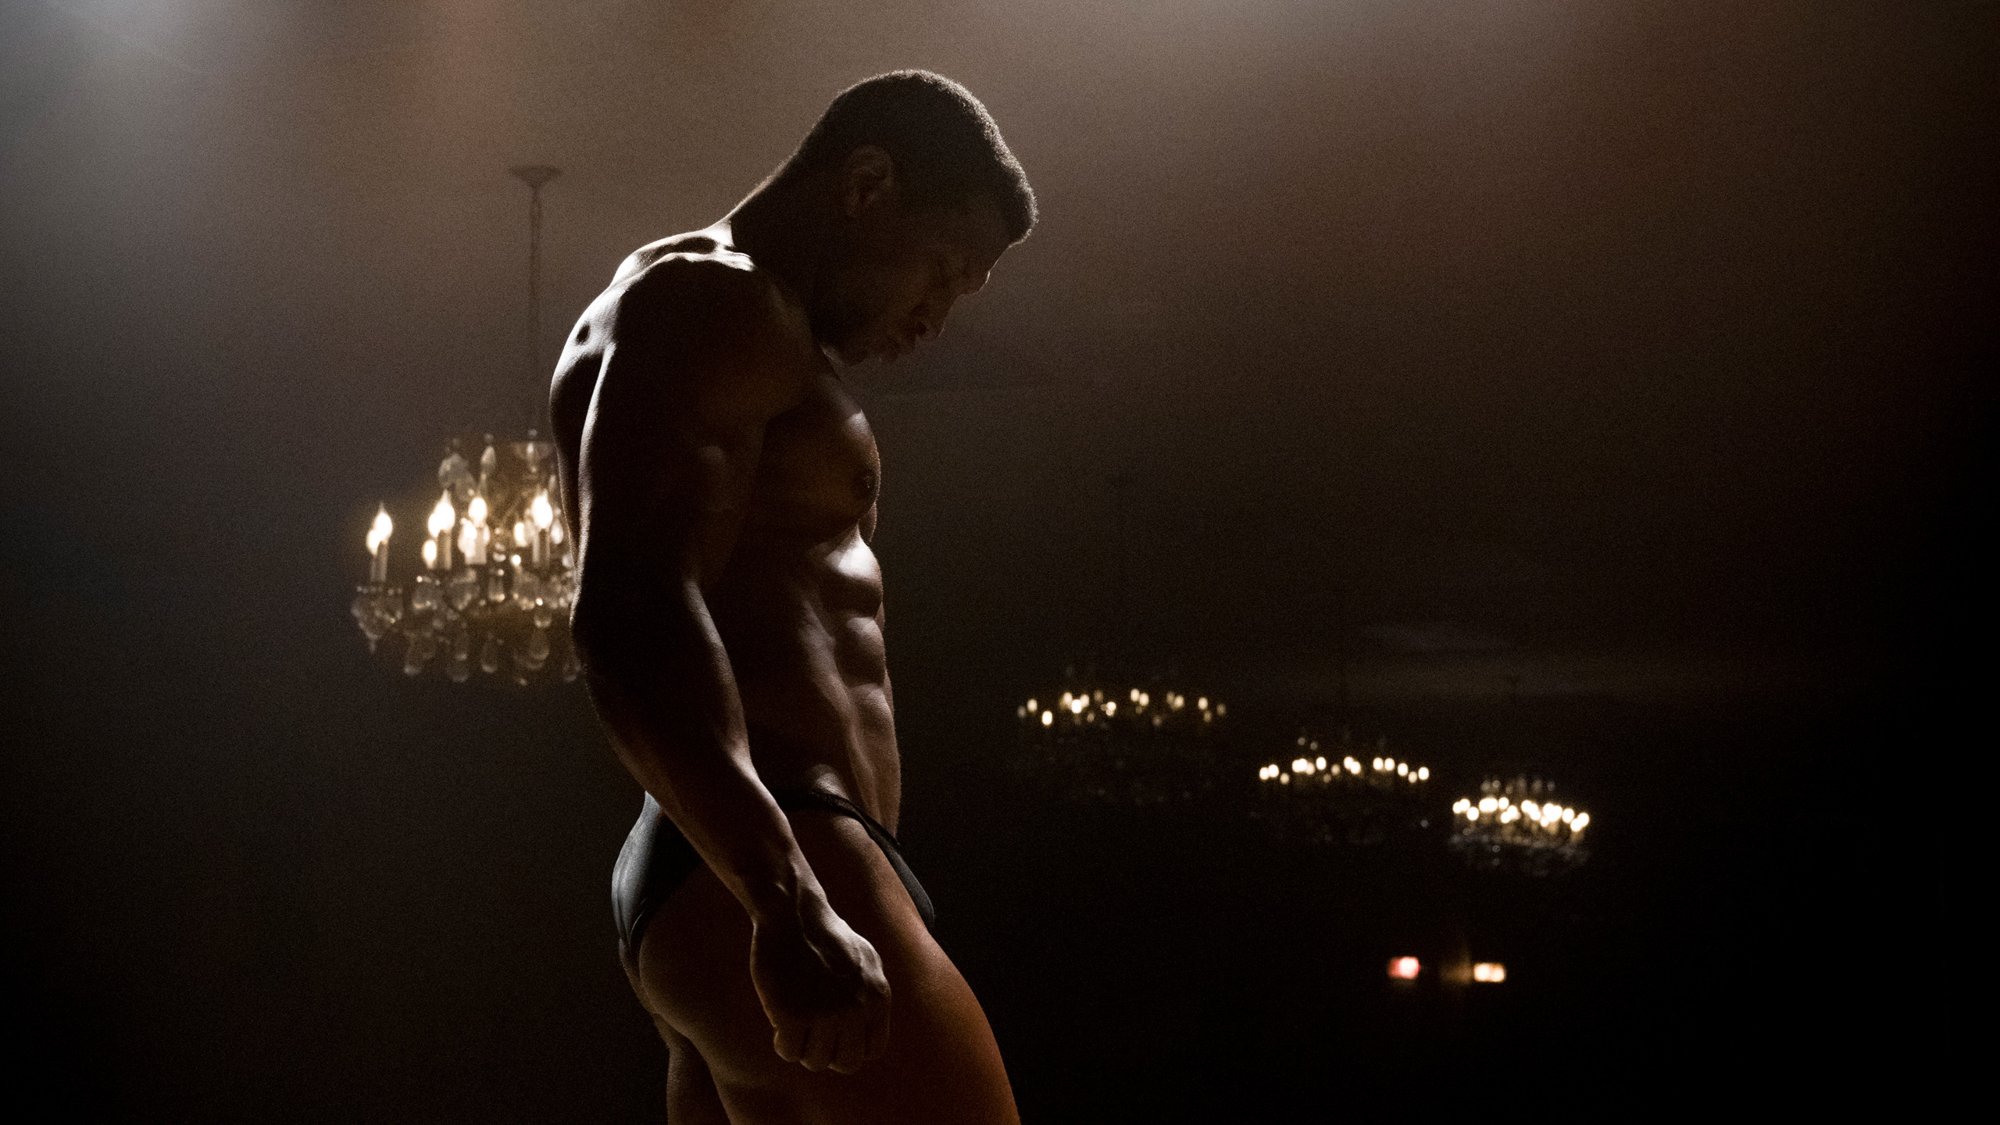 'Magazine Dreams' Jonathan Majors as Killian Maddox wearing a speedo, standing in a dark room with chandeliers